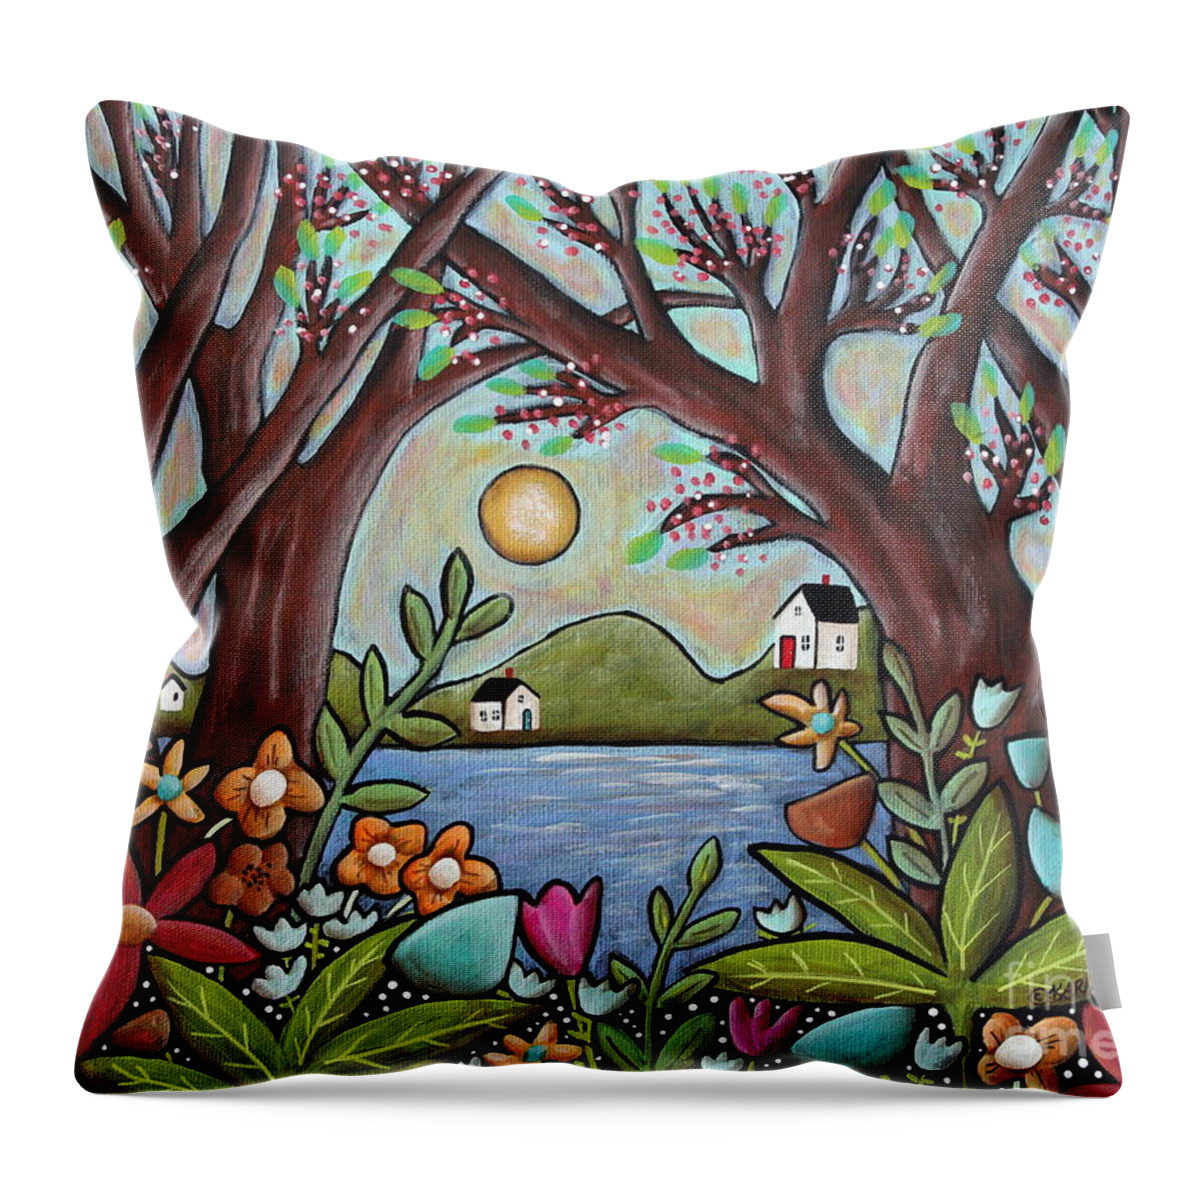 Seascape Throw Pillow featuring the painting Lake Cottages by Karla Gerard